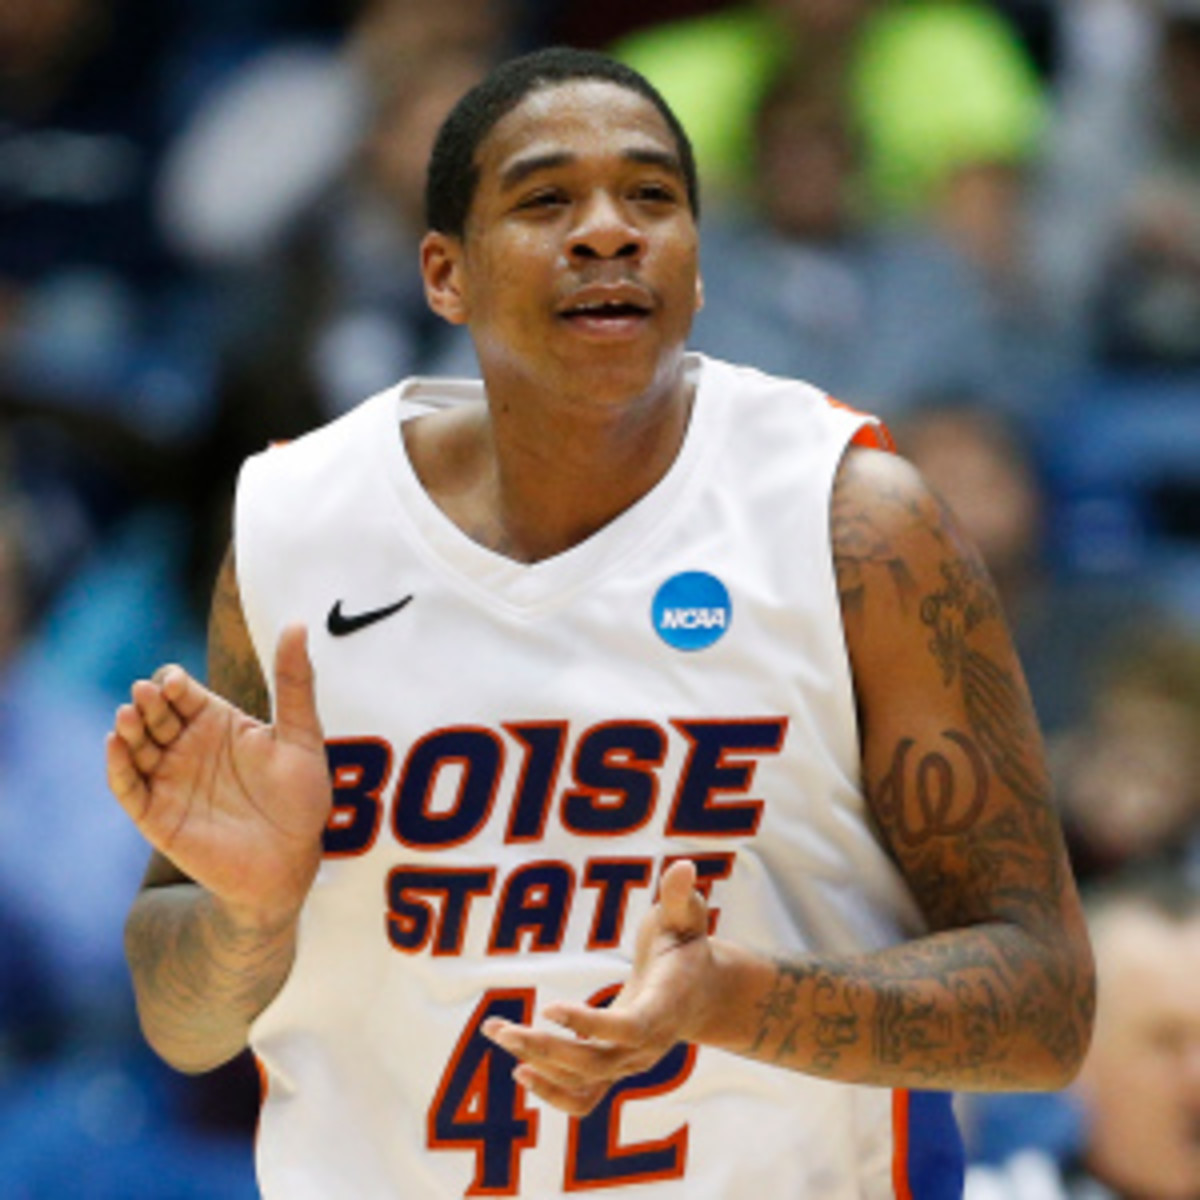 Kenny Buckner was arrested with a player from the Boise State women's basketball team. (Gregory Shamus/Getty Images) 